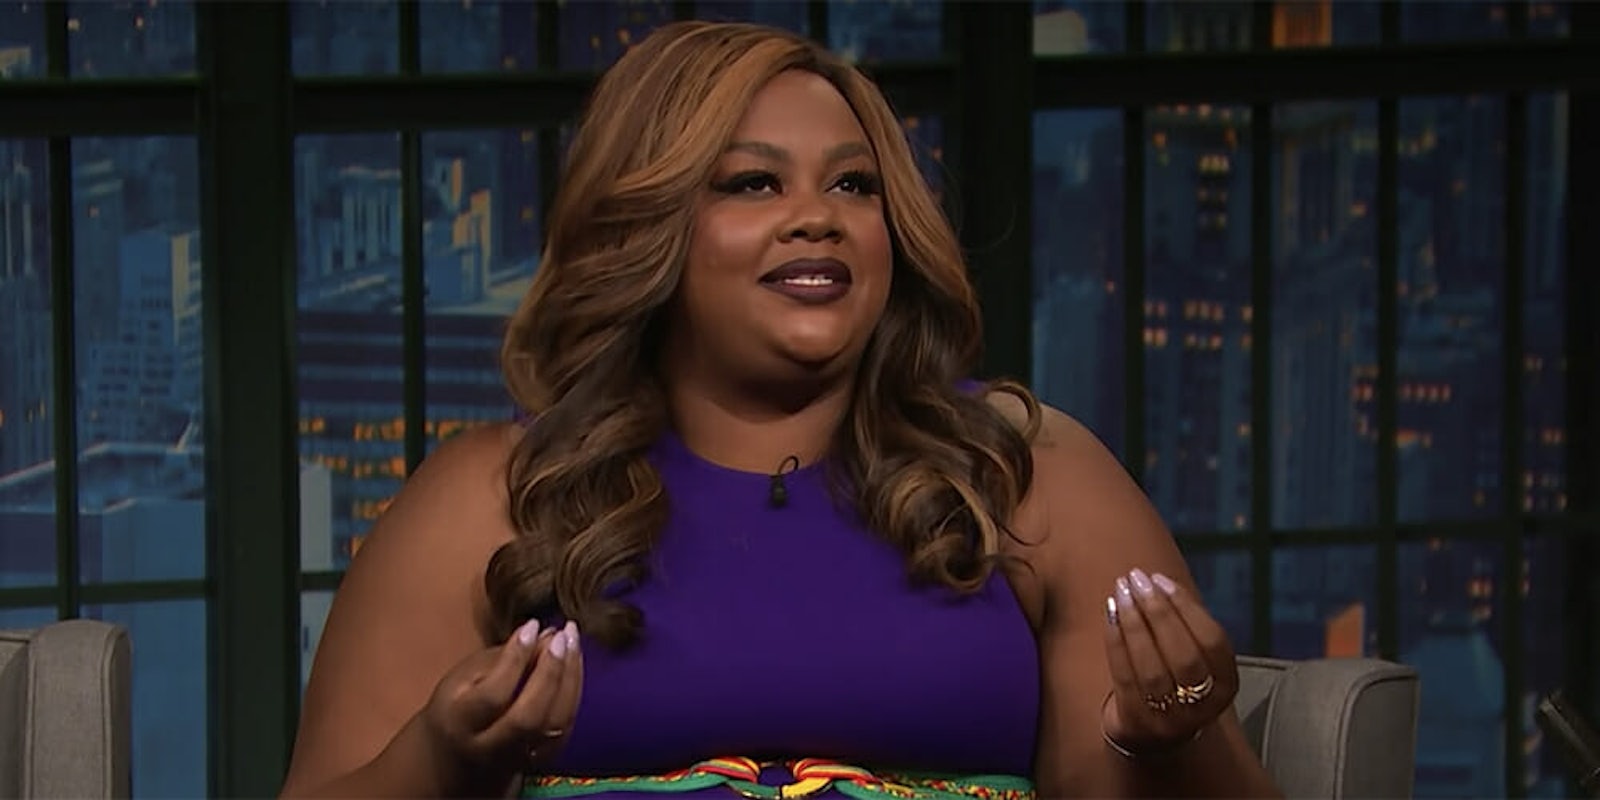 Nicole Byer calls out Netflix for 'whitewashing' a promotional image for 'Nailed It!'